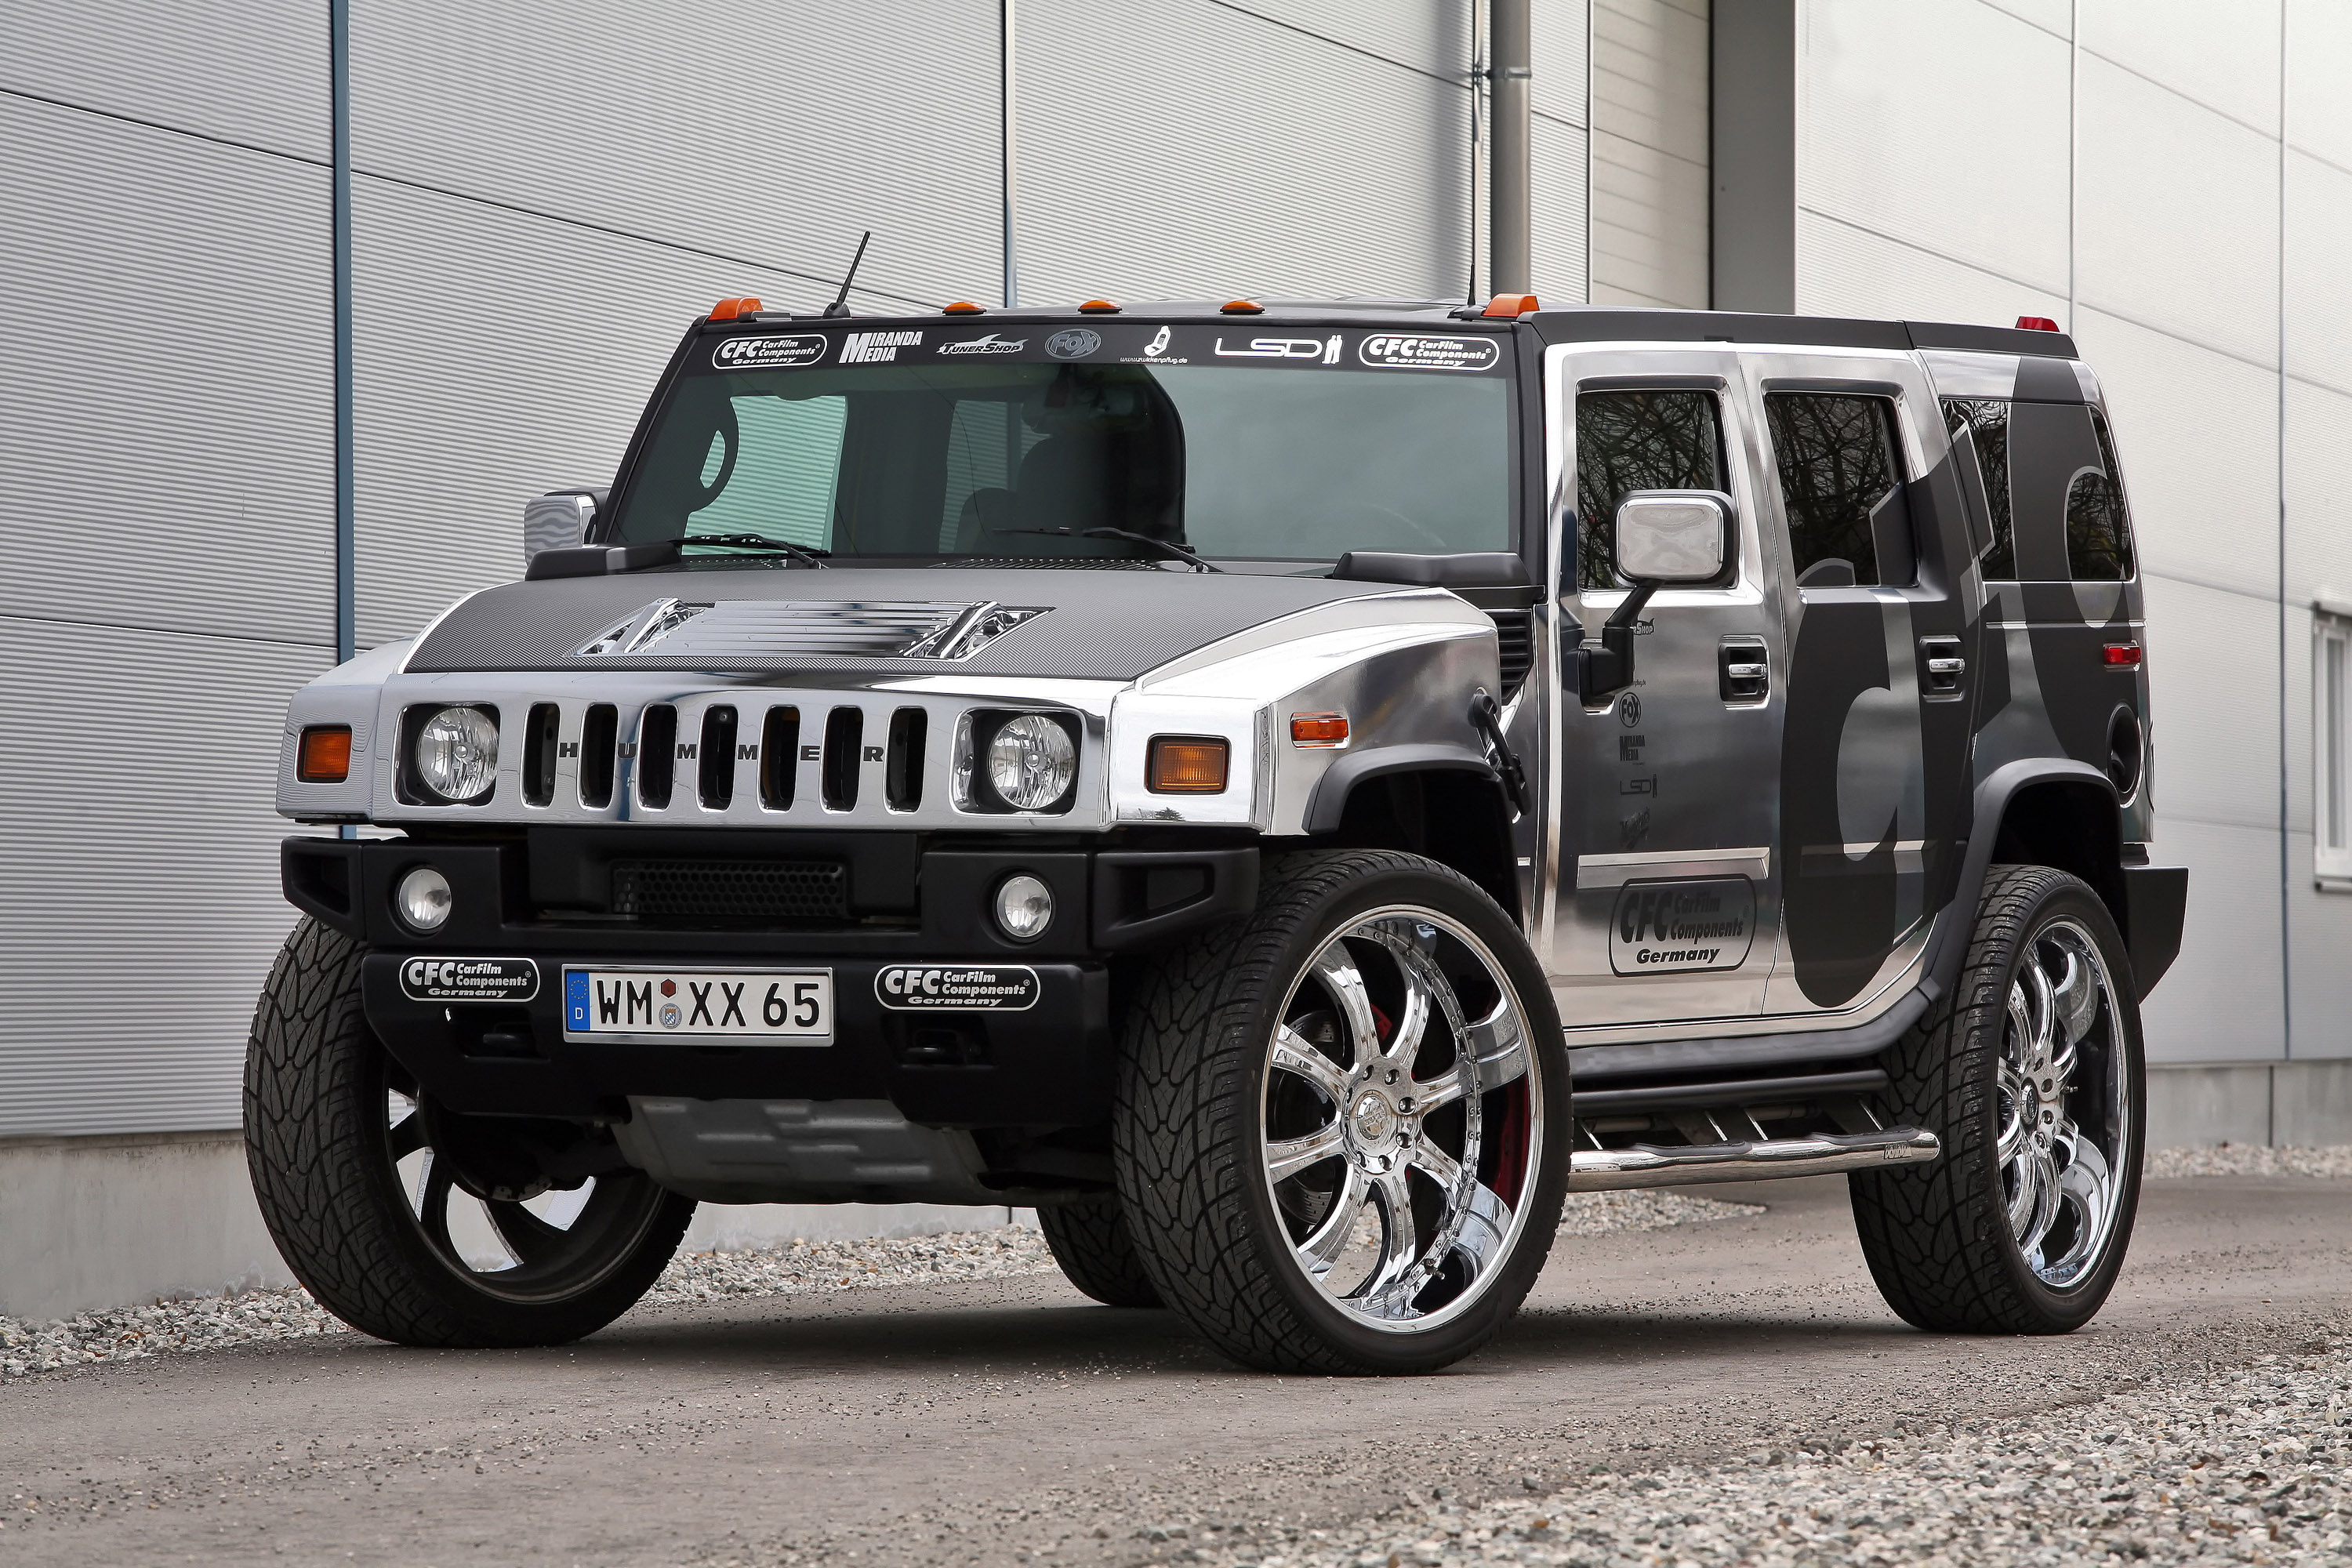 cars, side view, hummer, h2, cfc Full HD